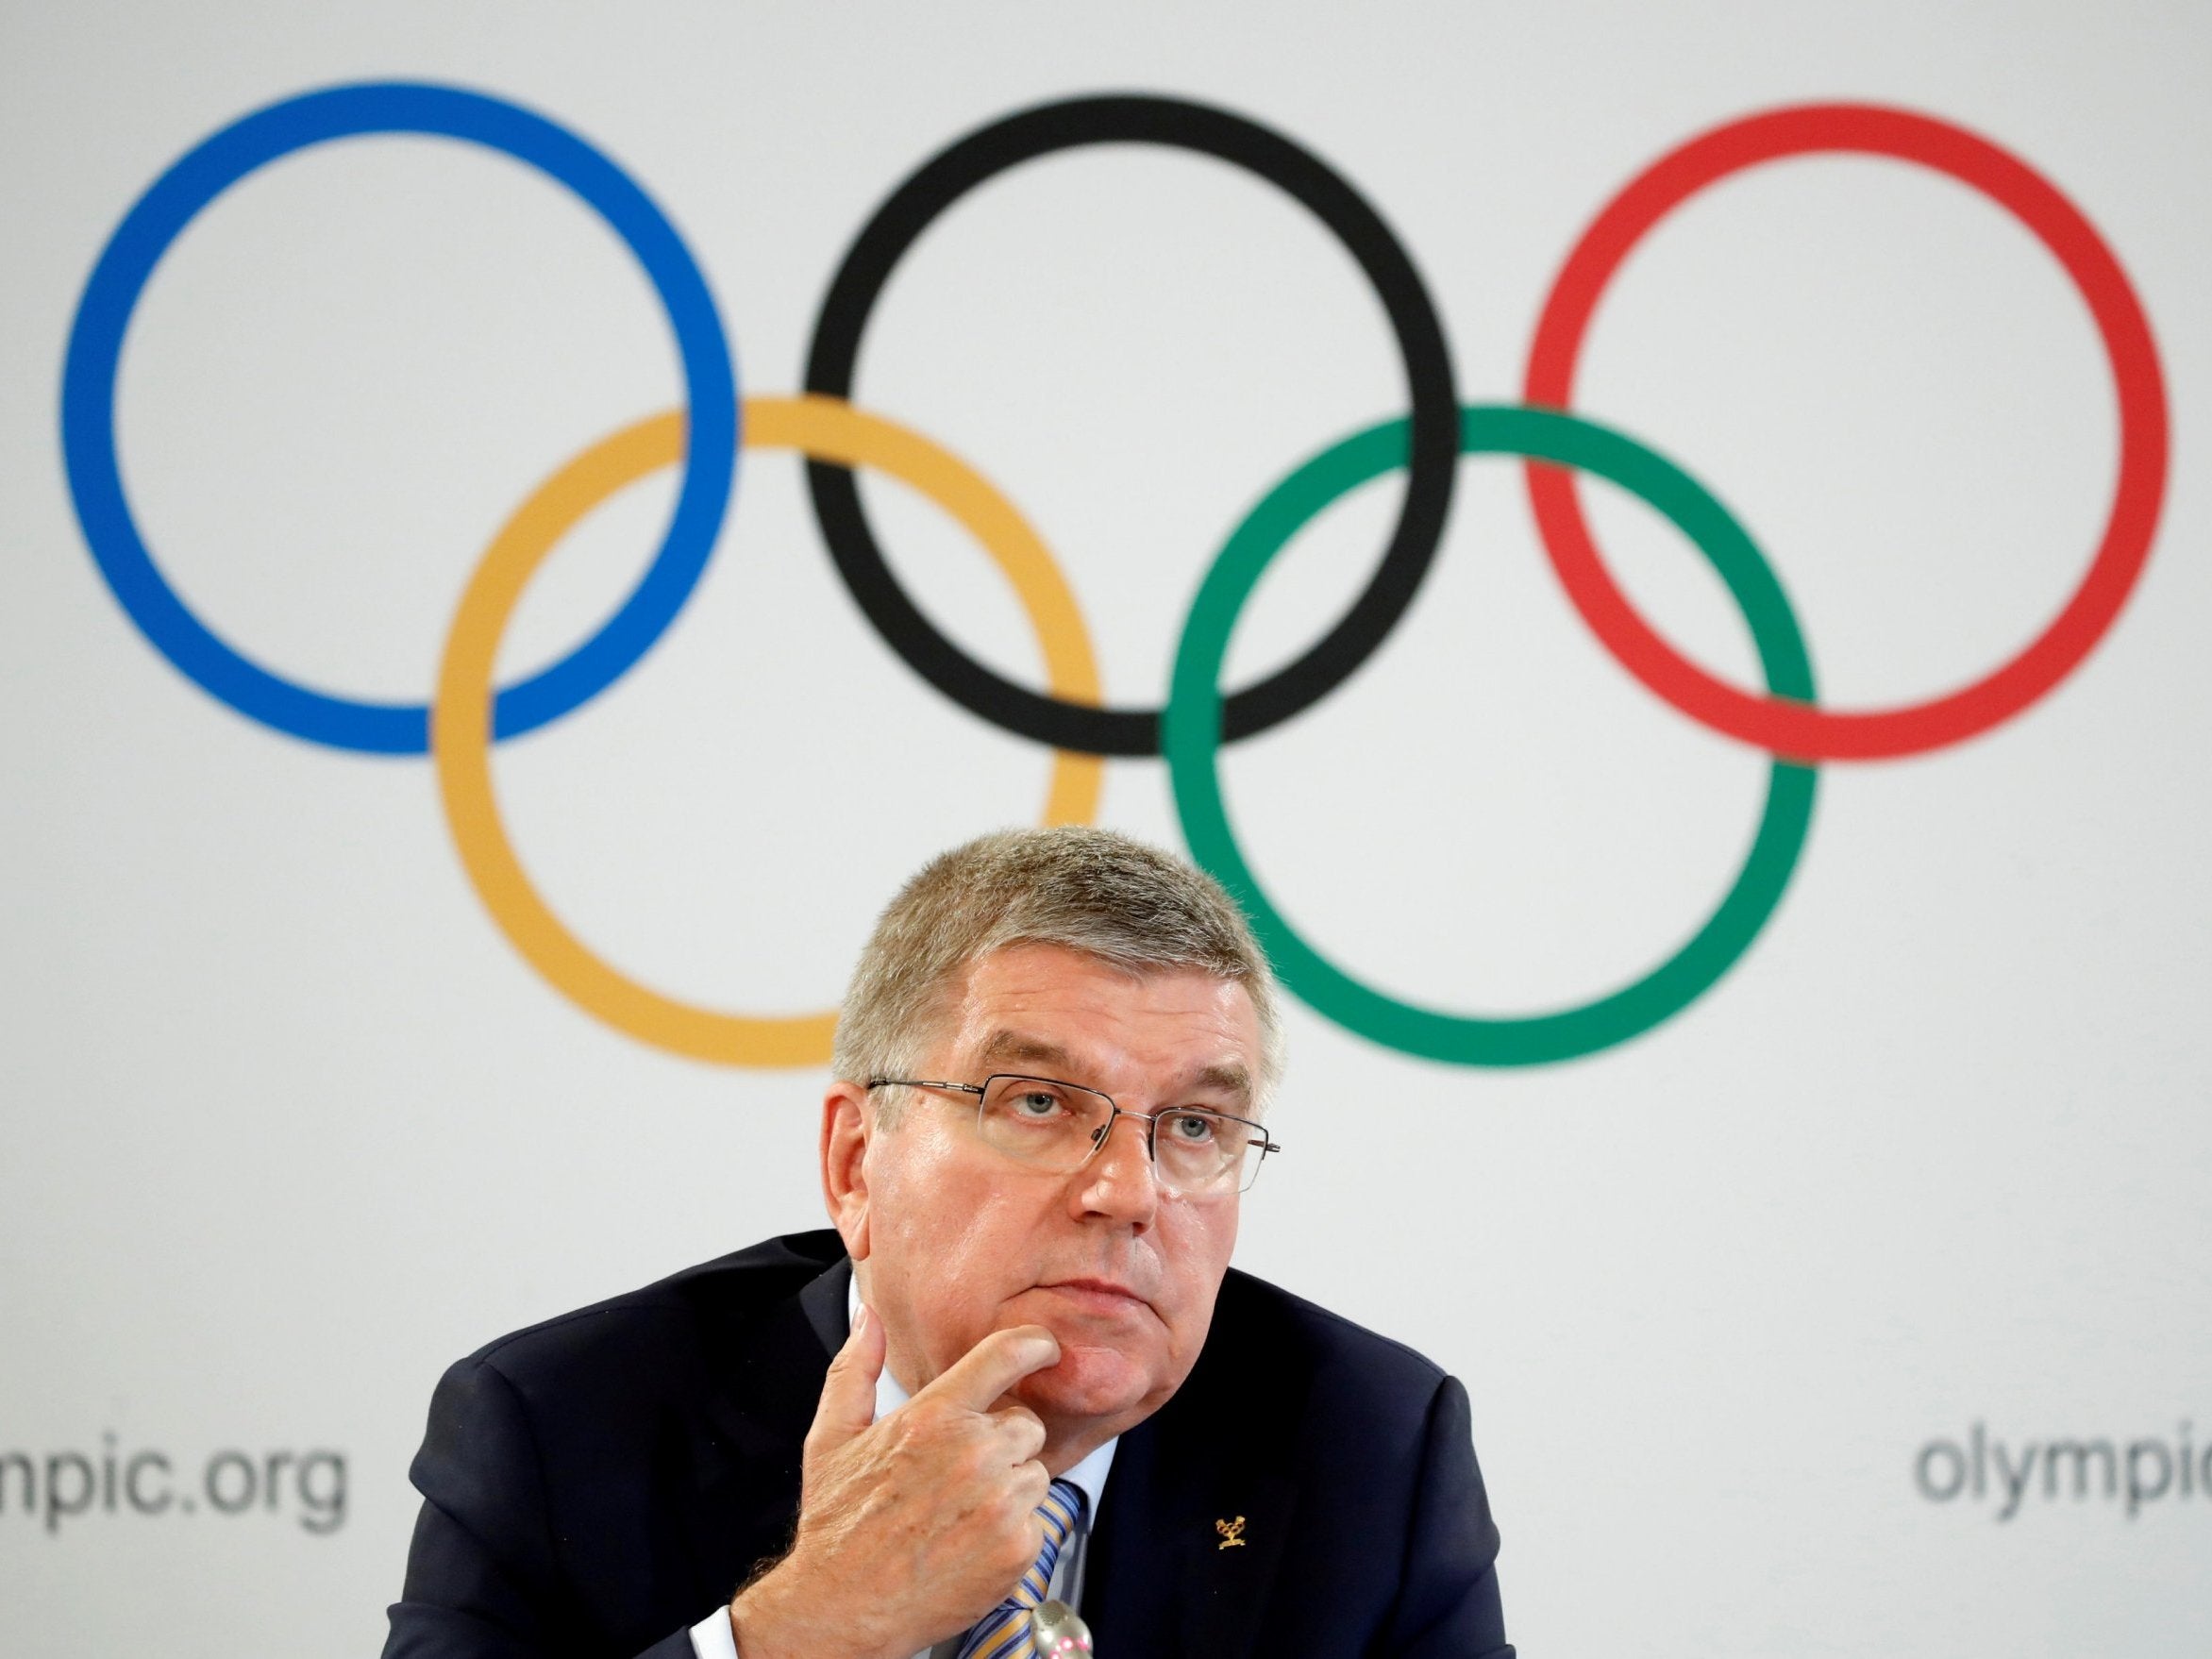 Thomas Bach has played down the chances of esports being added to the Olympics